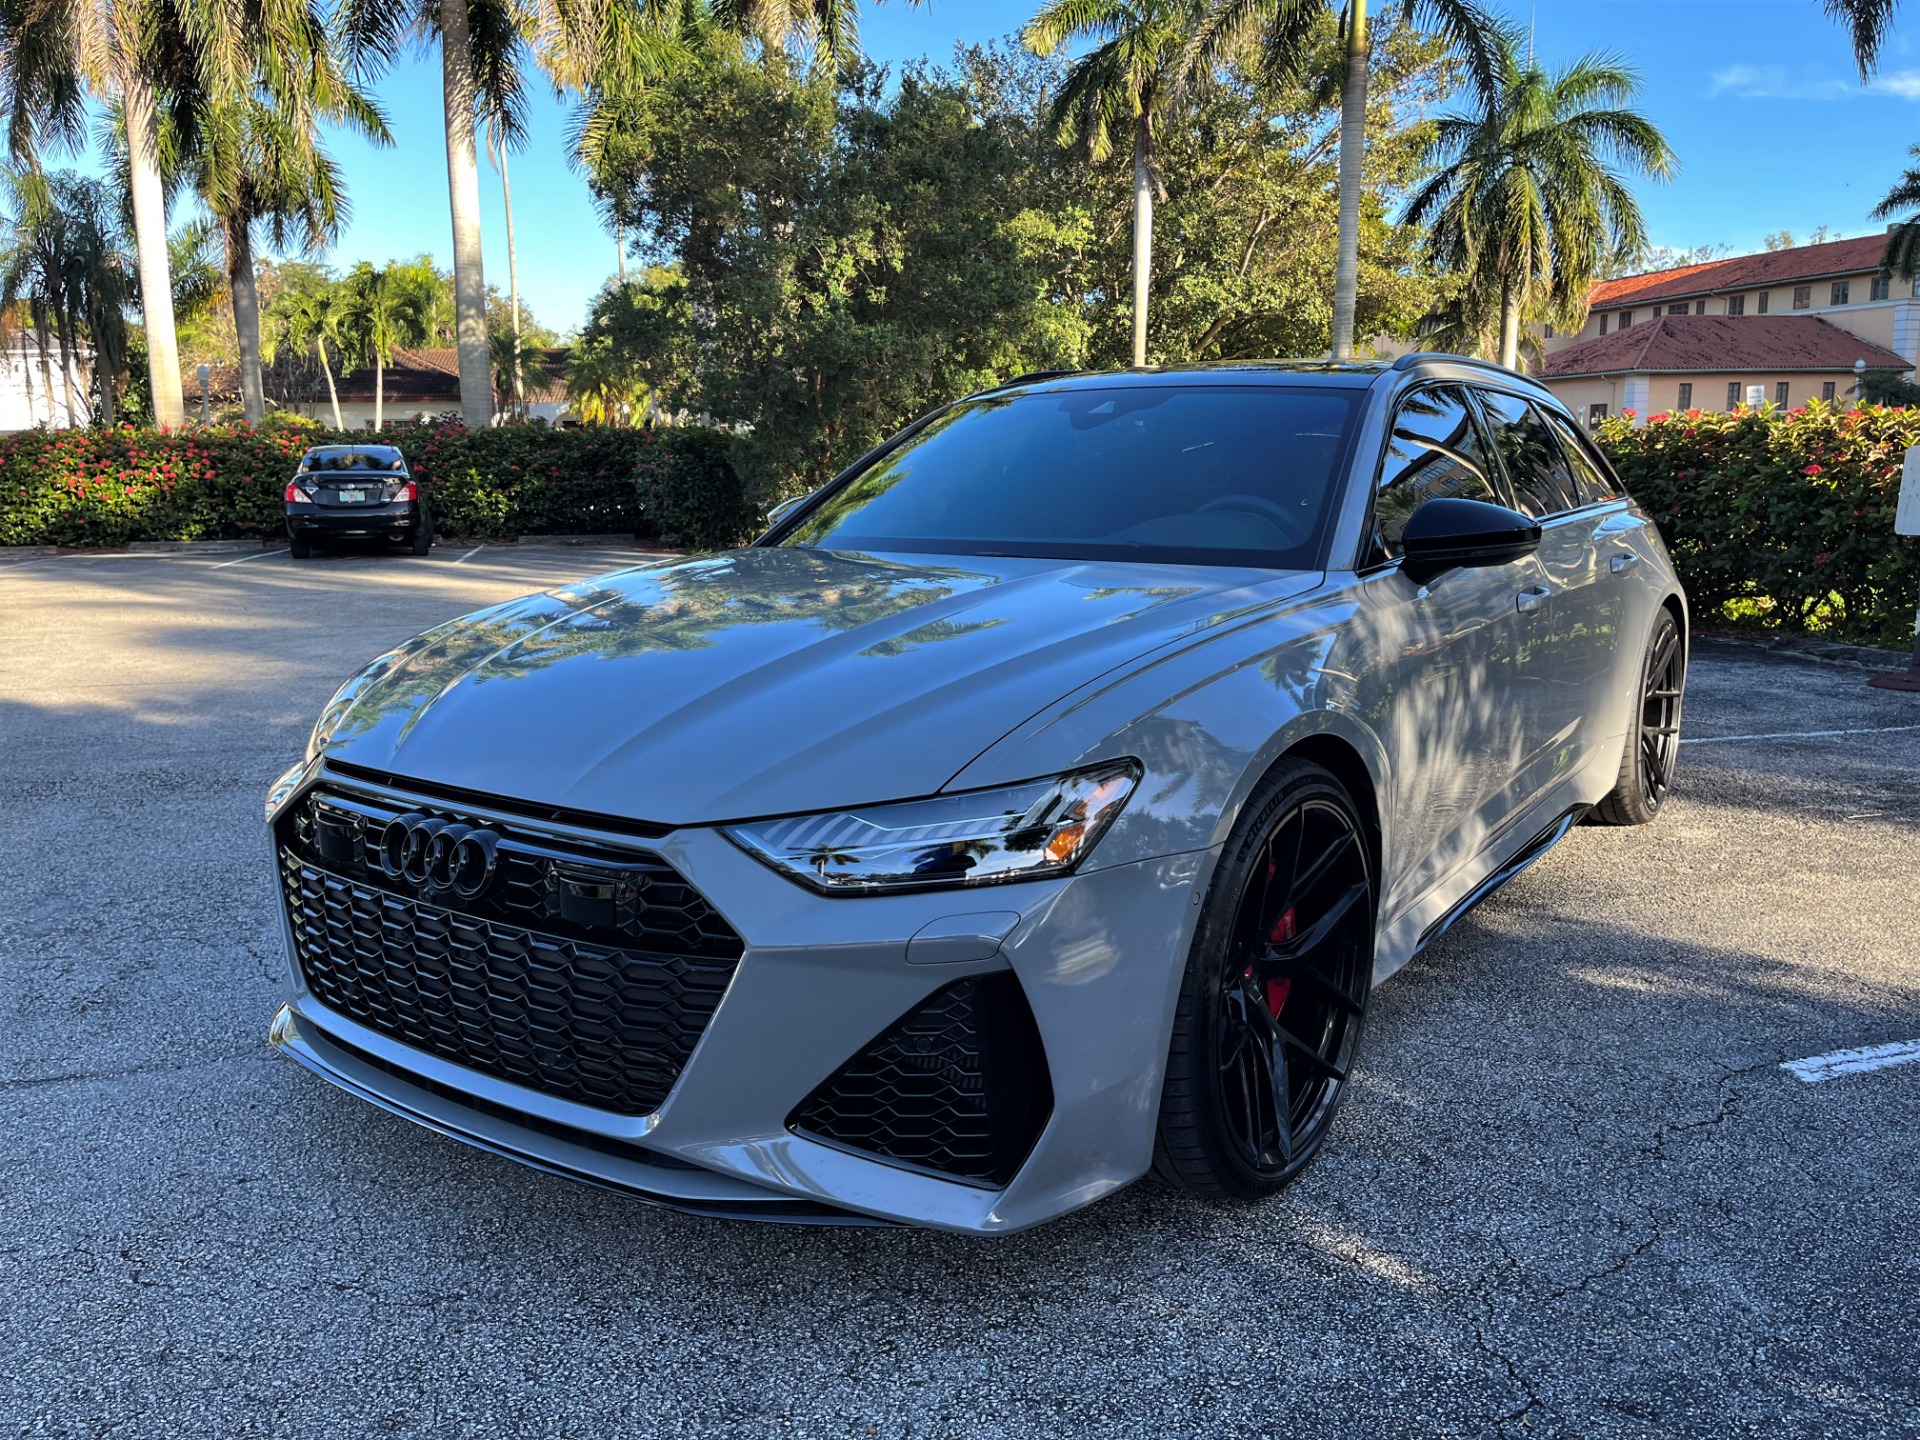 Used 2021 Audi RS 6 Avant 4.0T quattro Avant for sale $122,850 at The Gables Sports Cars in Miami FL 33146 4